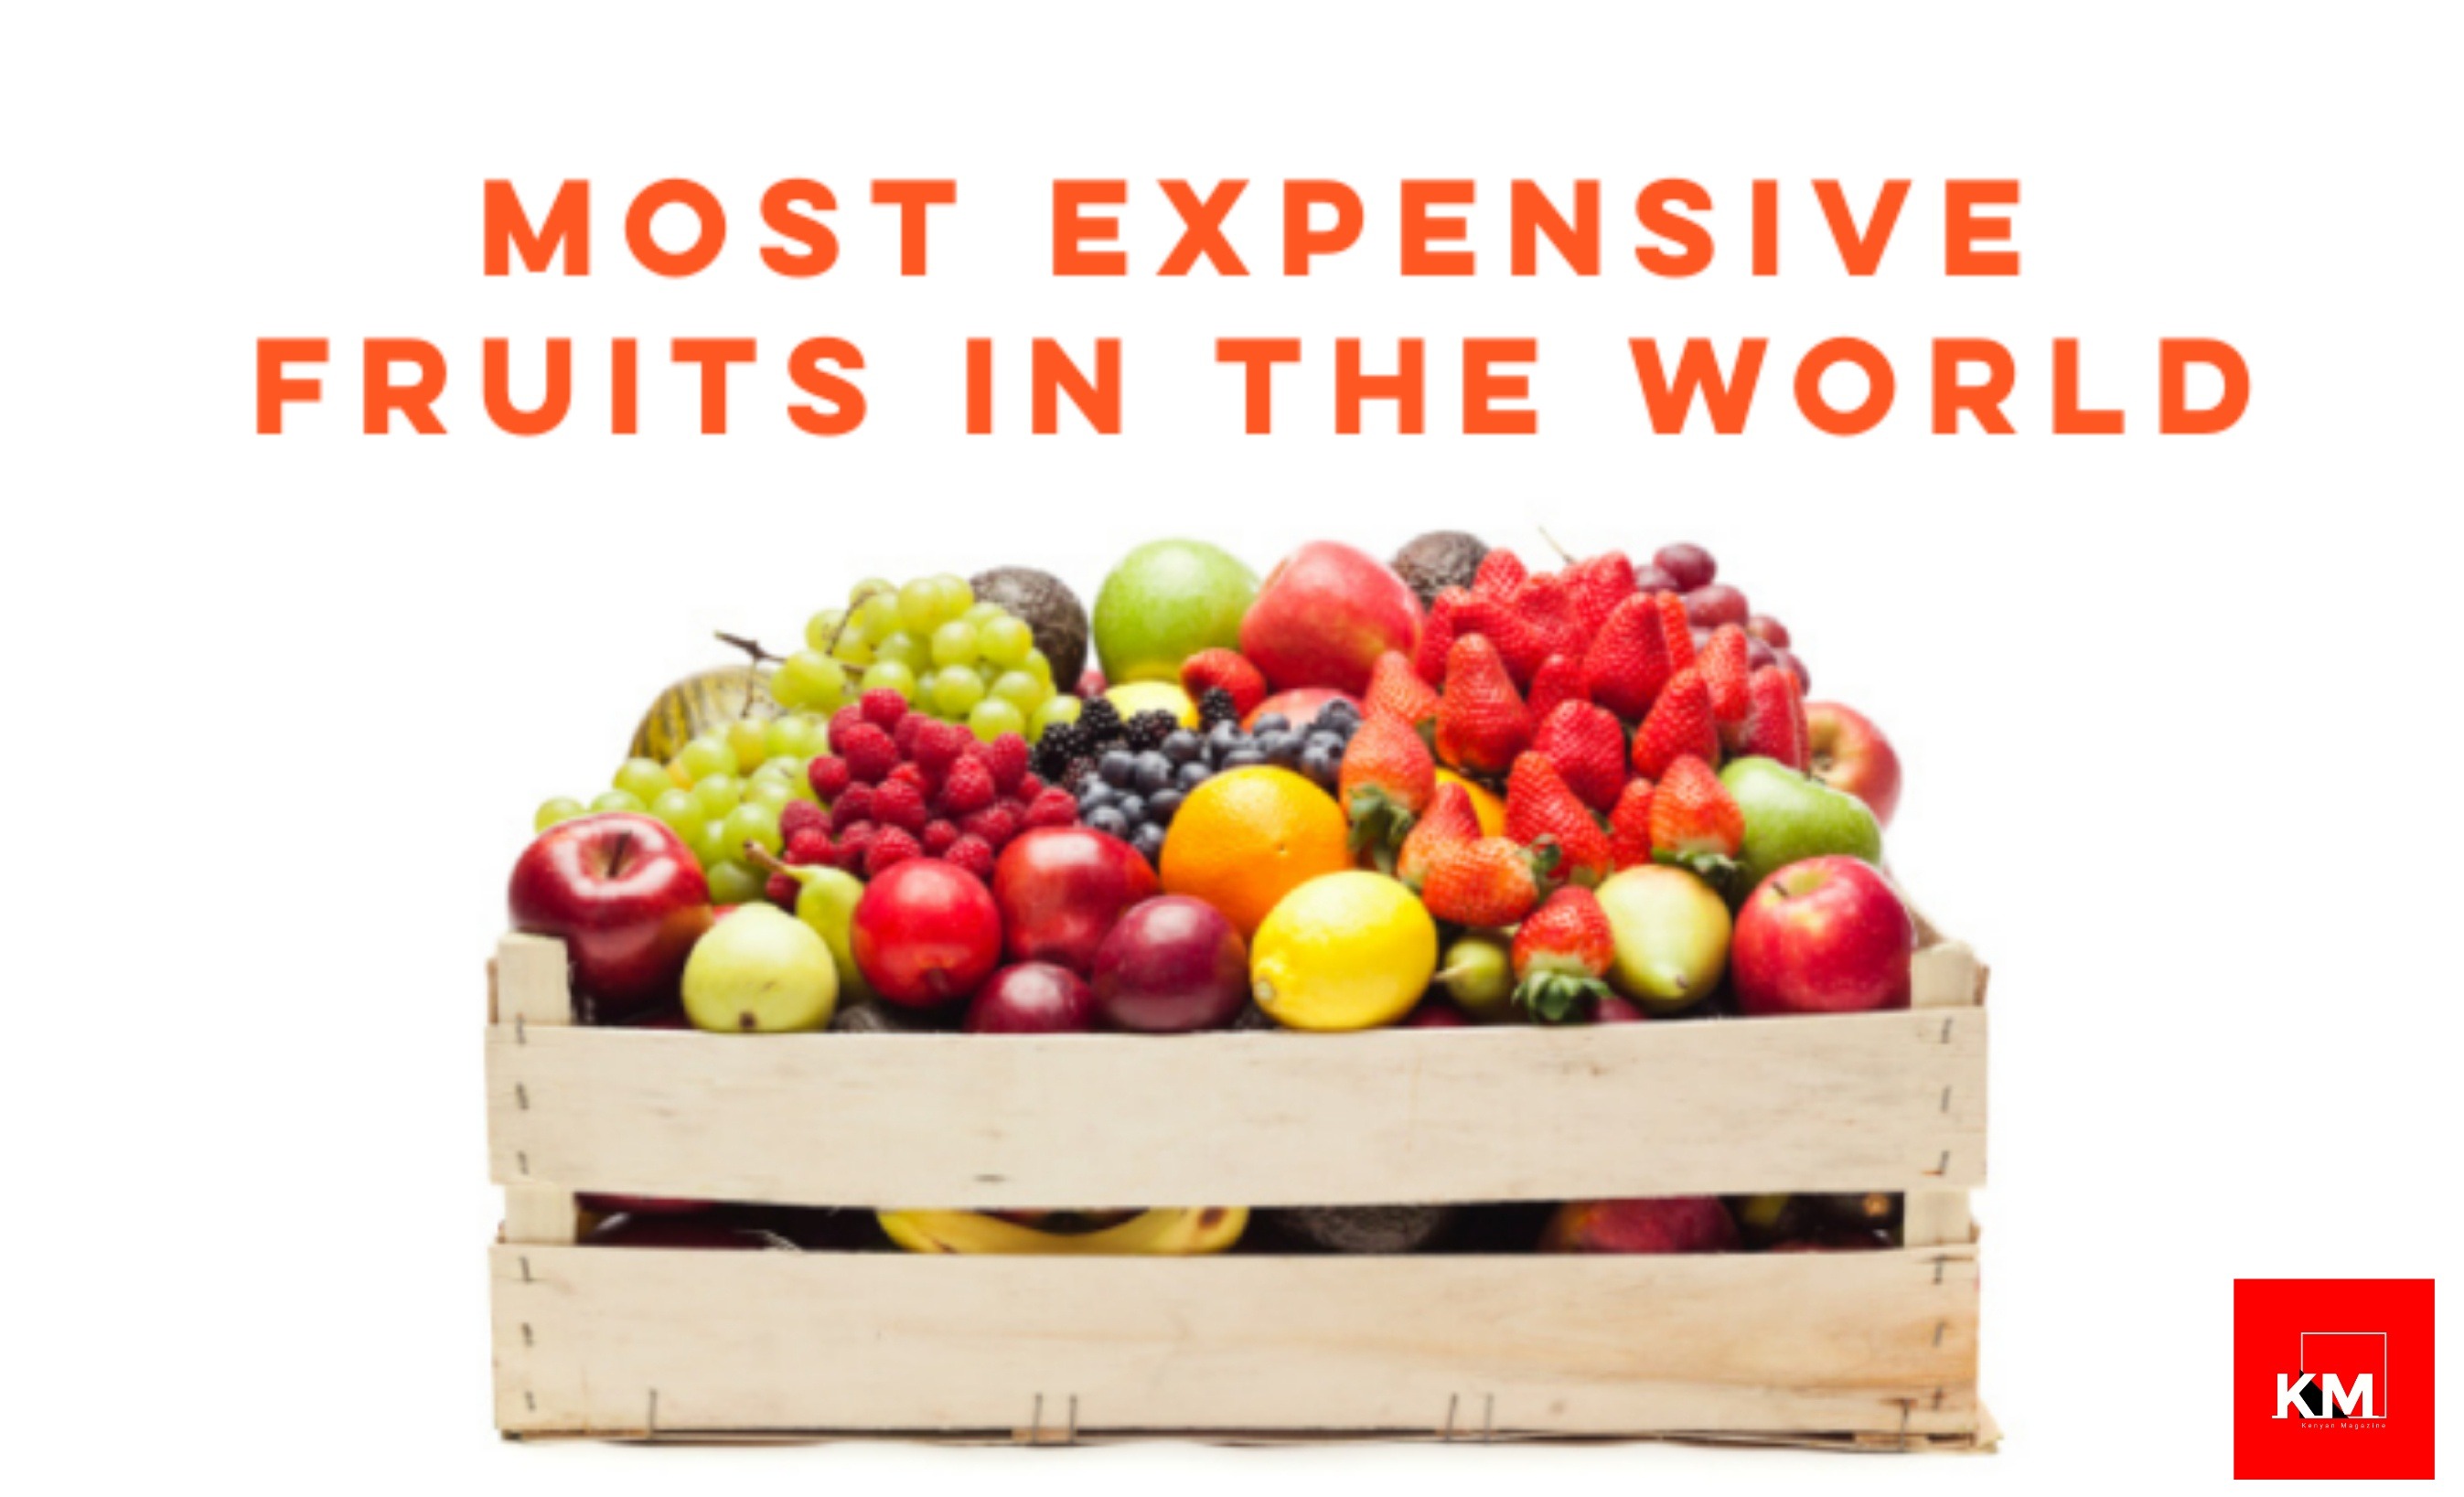 Most expensive fruits